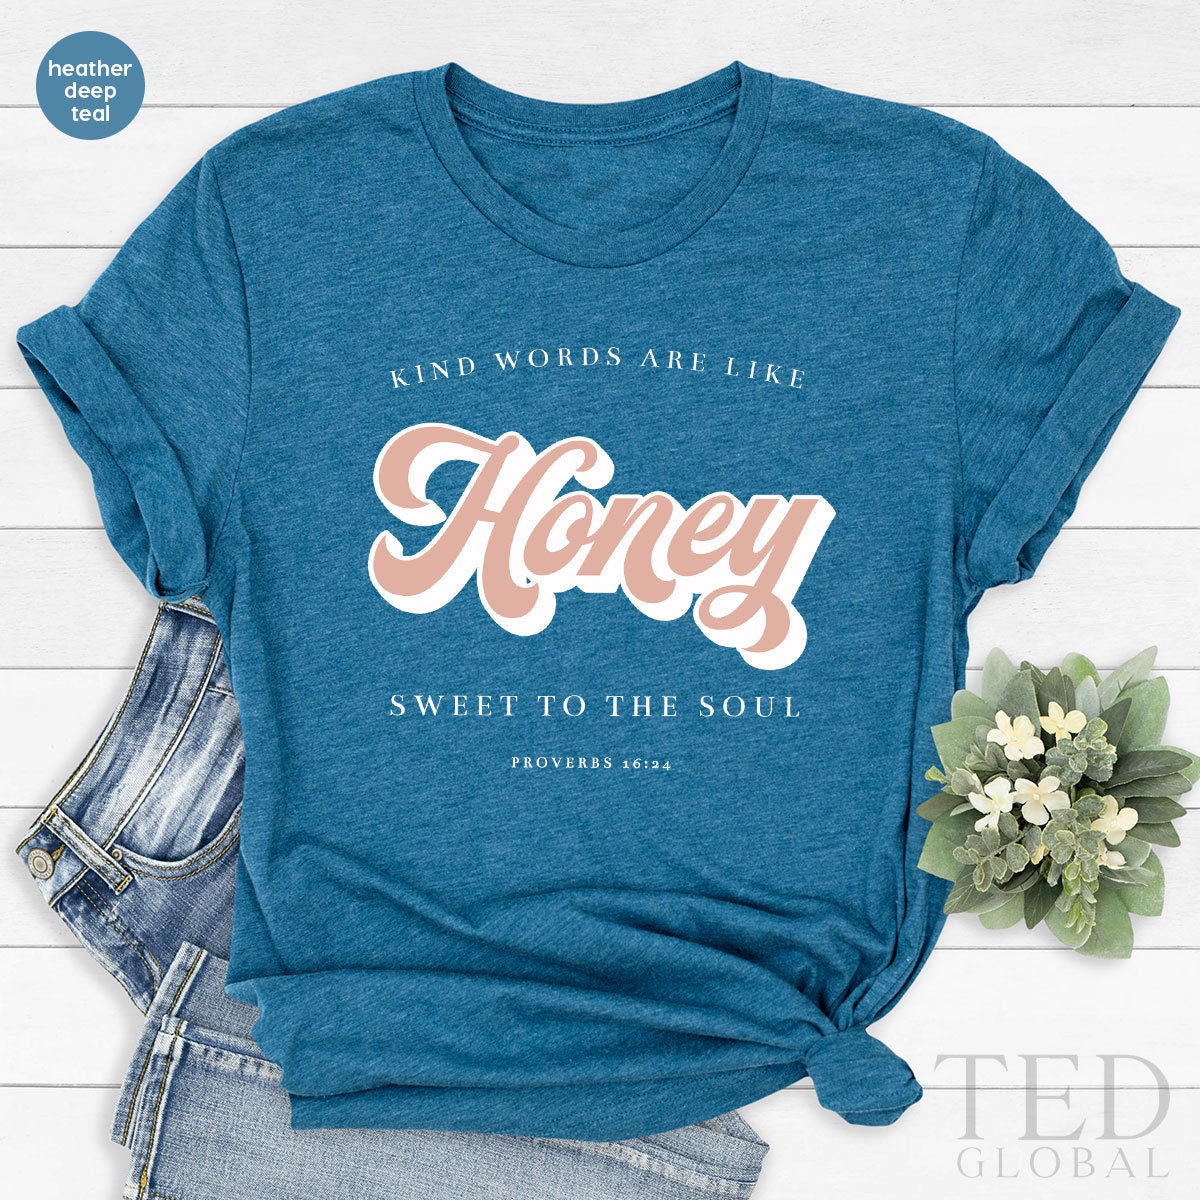 Honey Shirt, Proverbs 16:24 T Shirt, Retro 6Os-70s T Shirt, Sweet To The Soul Shirts, Christian Tee, Religious T-Shirt, Gift For Religious - Fastdeliverytees.com